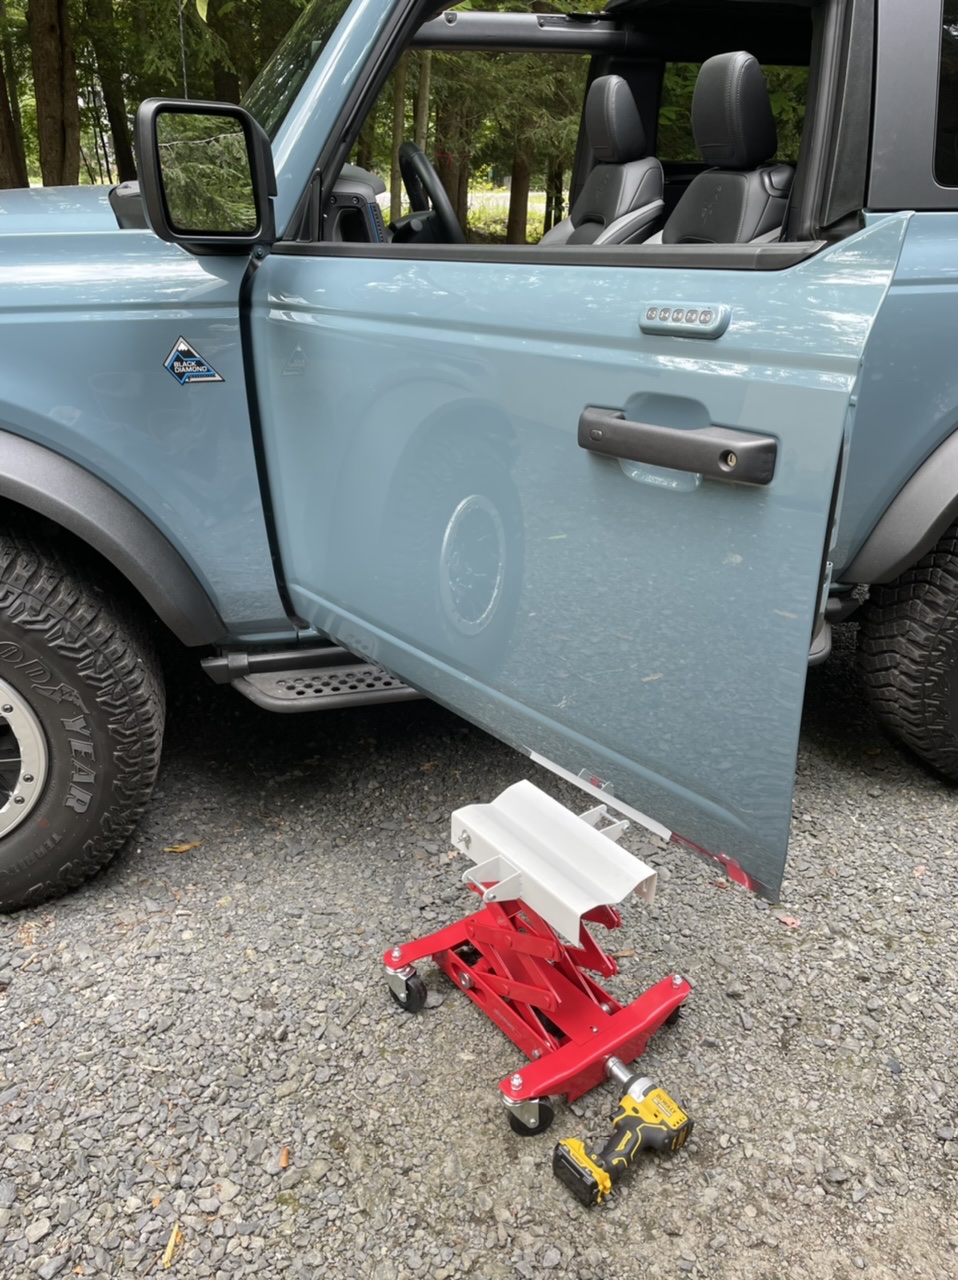 Ford Bronco Oopsie... dropped and dented my door this weekend 8E16DCDB-E4EC-4679-AE64-9D547E4B37AB